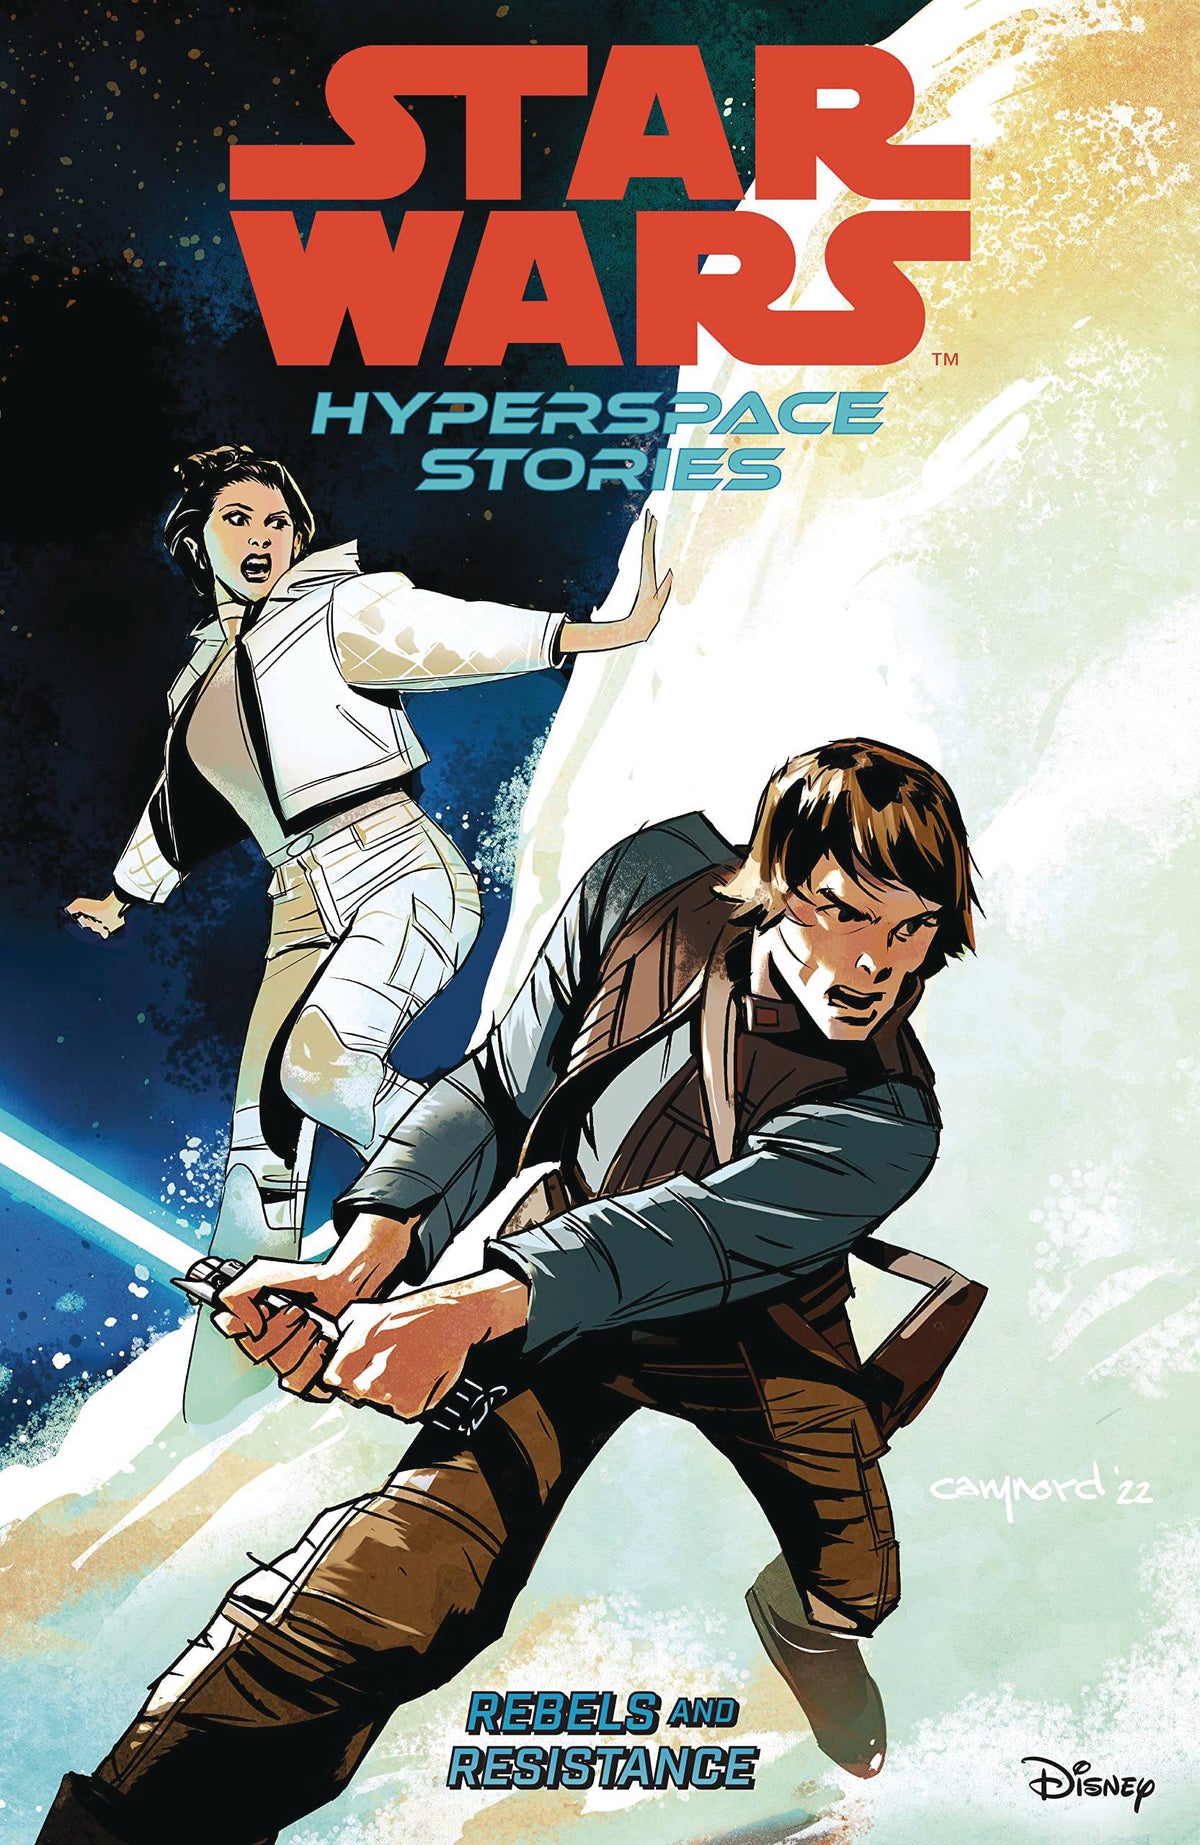 Star Wars Hyperspace Stories Tp Vol 01 - State of Comics